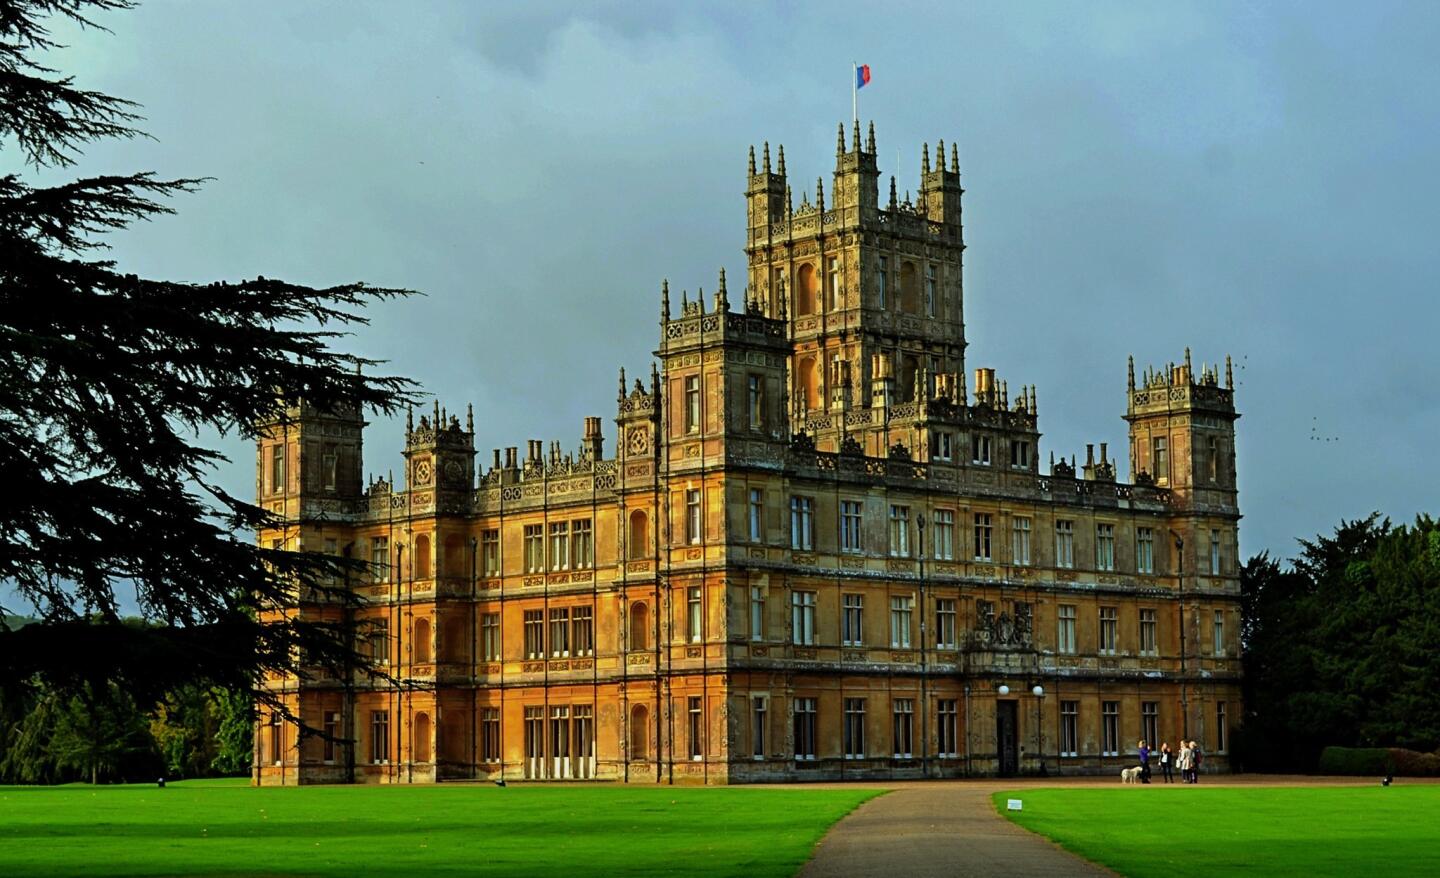 Highclere Castle is the stand-in for the fictional "Downton Abbey" series on PBS. The castle is about five miles from the town of Newbury, England.